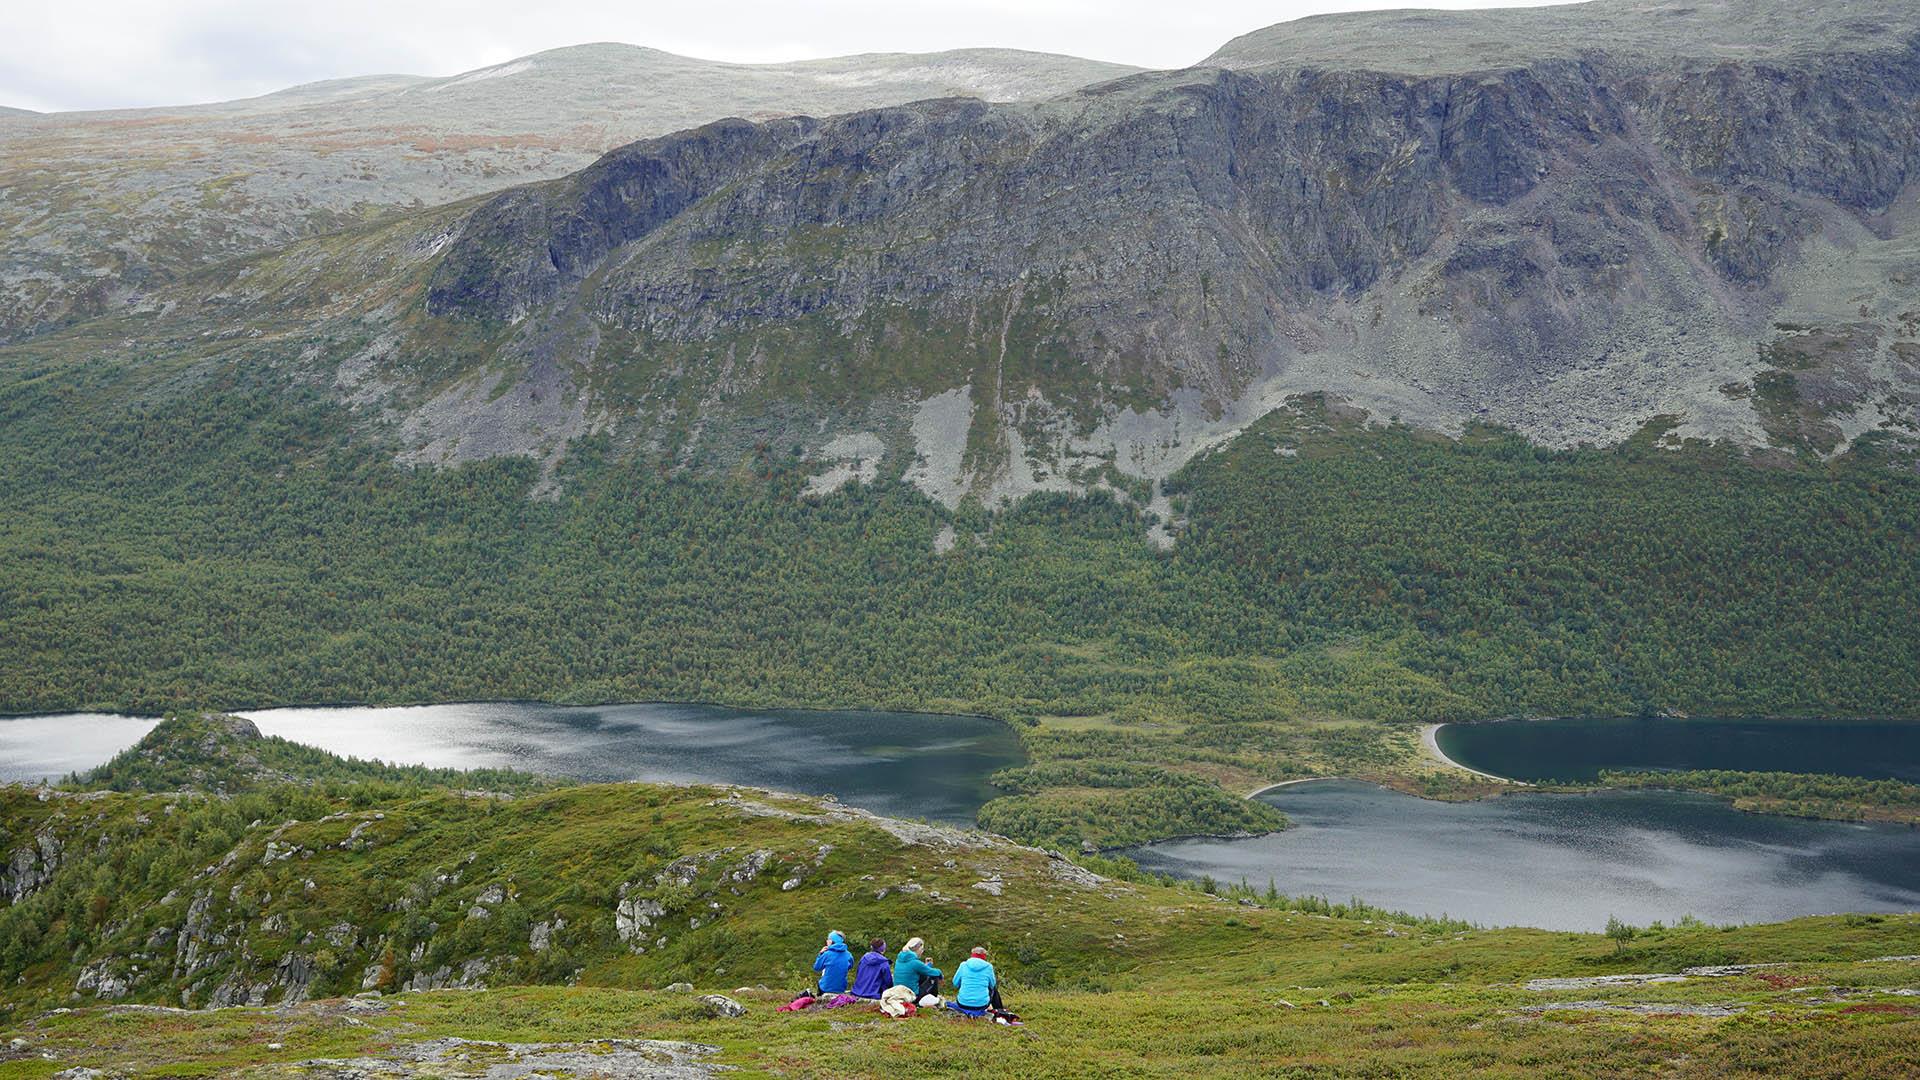 Four persons sit in the grass and enjoy a wild landscape with lakes and steep mountain sides.